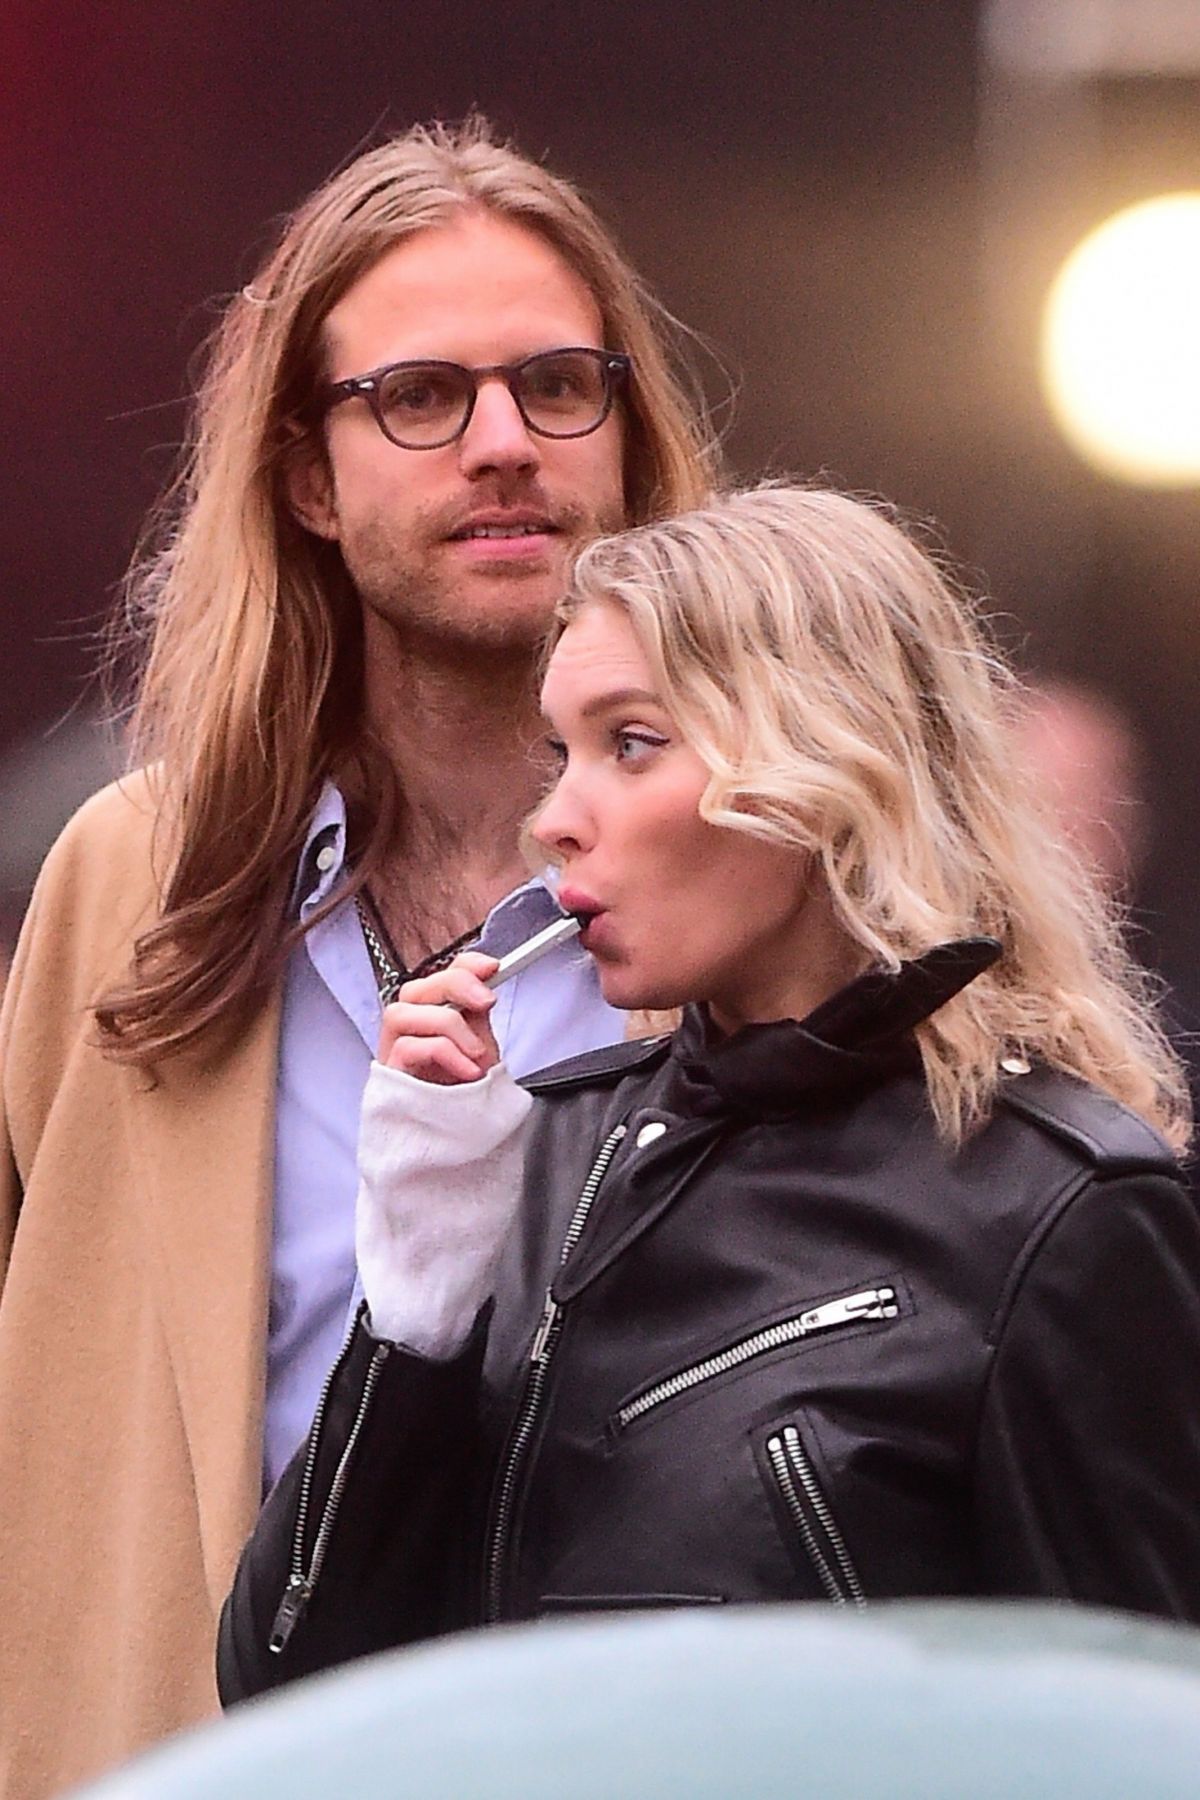 elsa-hosk-and-tom-daly-out-in-new-york-04-16-2019-2.jpg